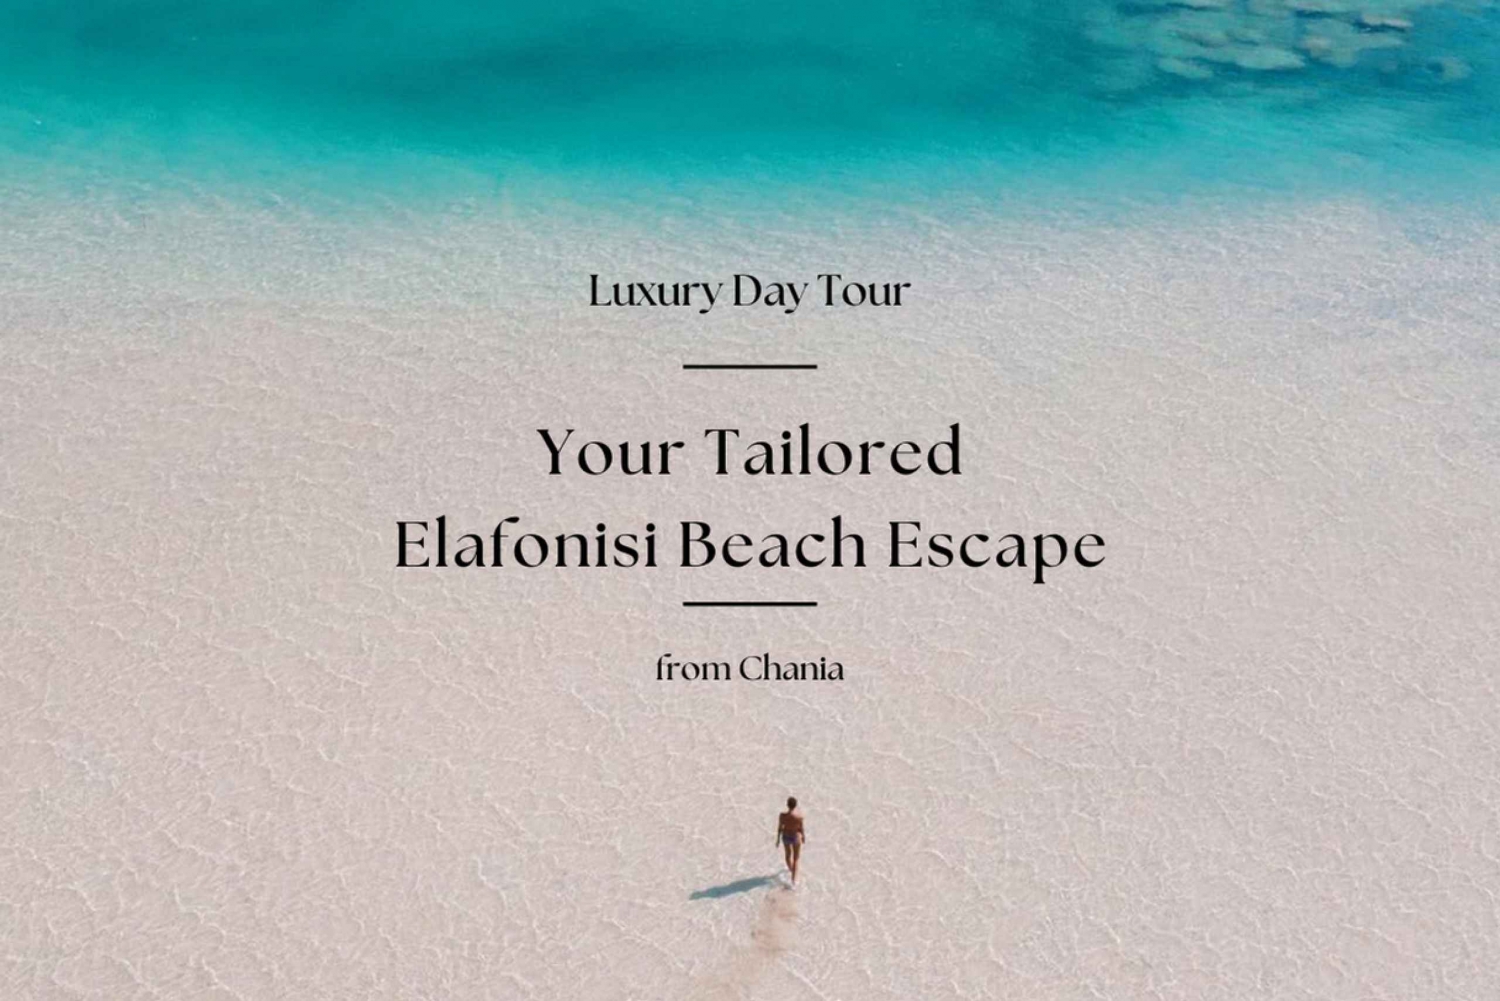 Your Tailored Elafonisi Escape. Luxury Day Tour from Chania.